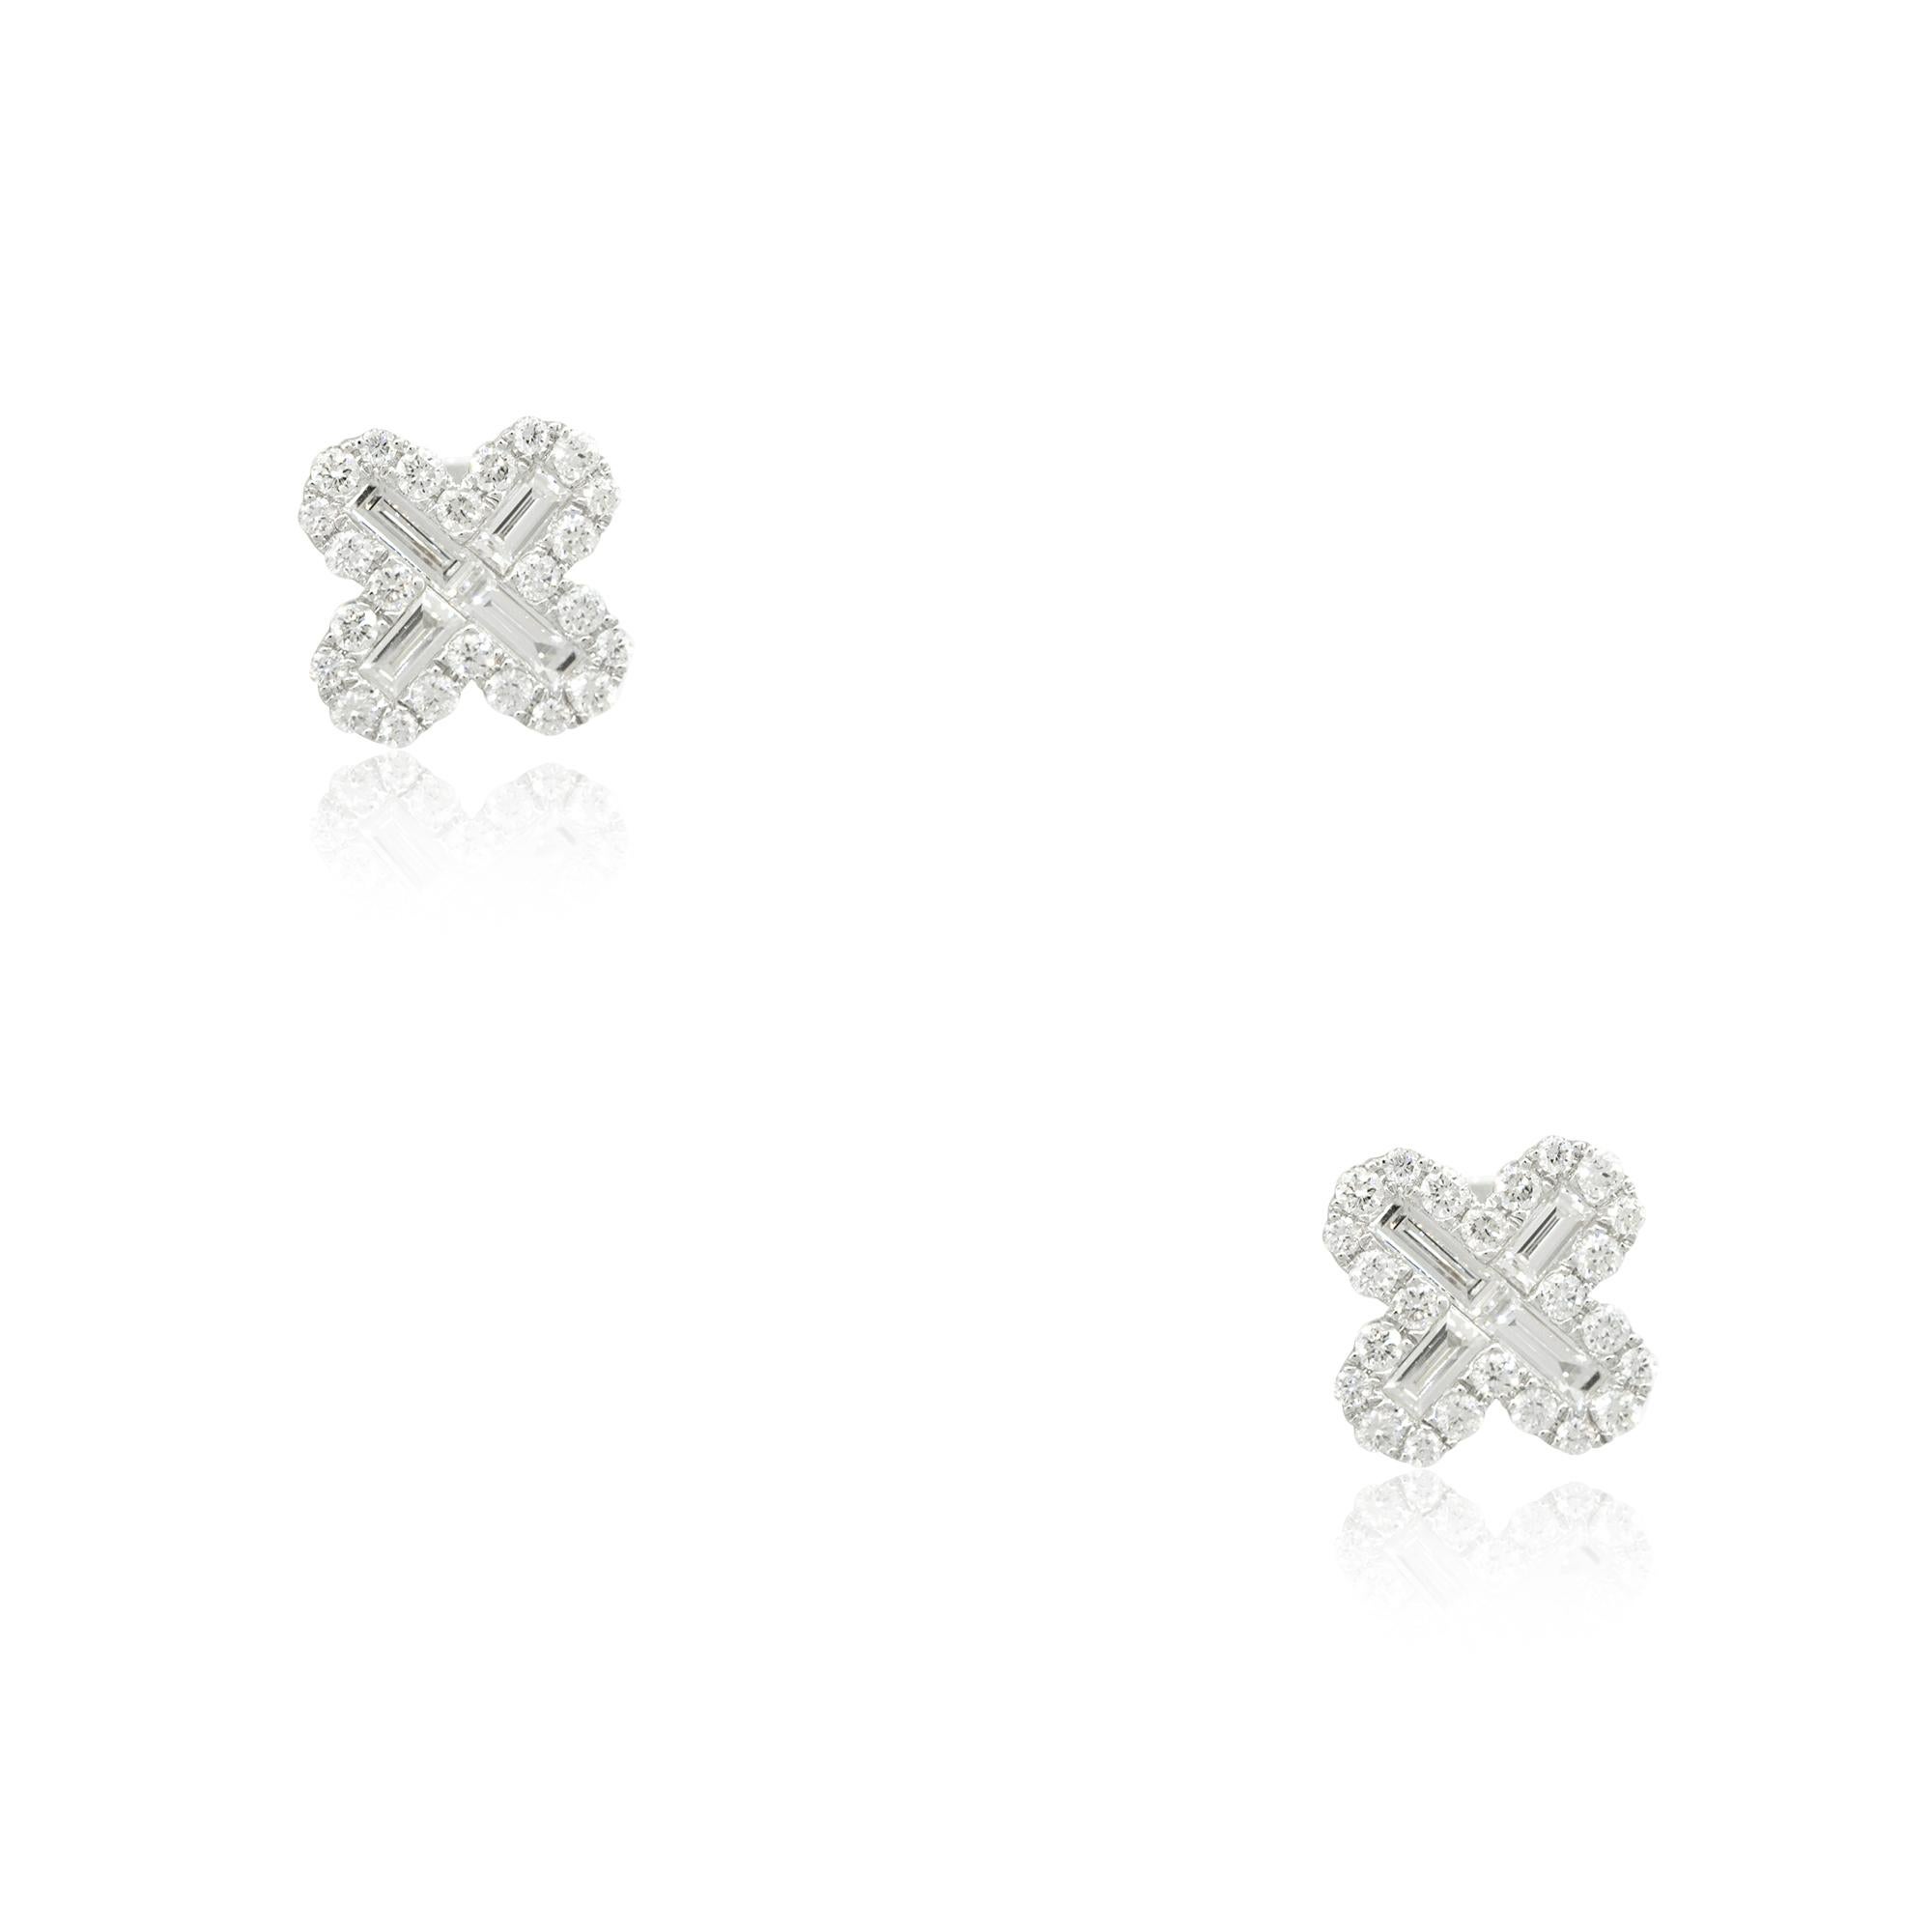 18k White Gold 1.16ctw Round Brilliant and Baguette Diamond Clover Earrings
Material: 18k White Gold
Diamond Details: Approximately 1.16ctw of Round Brilliant and Baguette Cut Diamonds. Diamonds are arranged in the shape of a clover or an